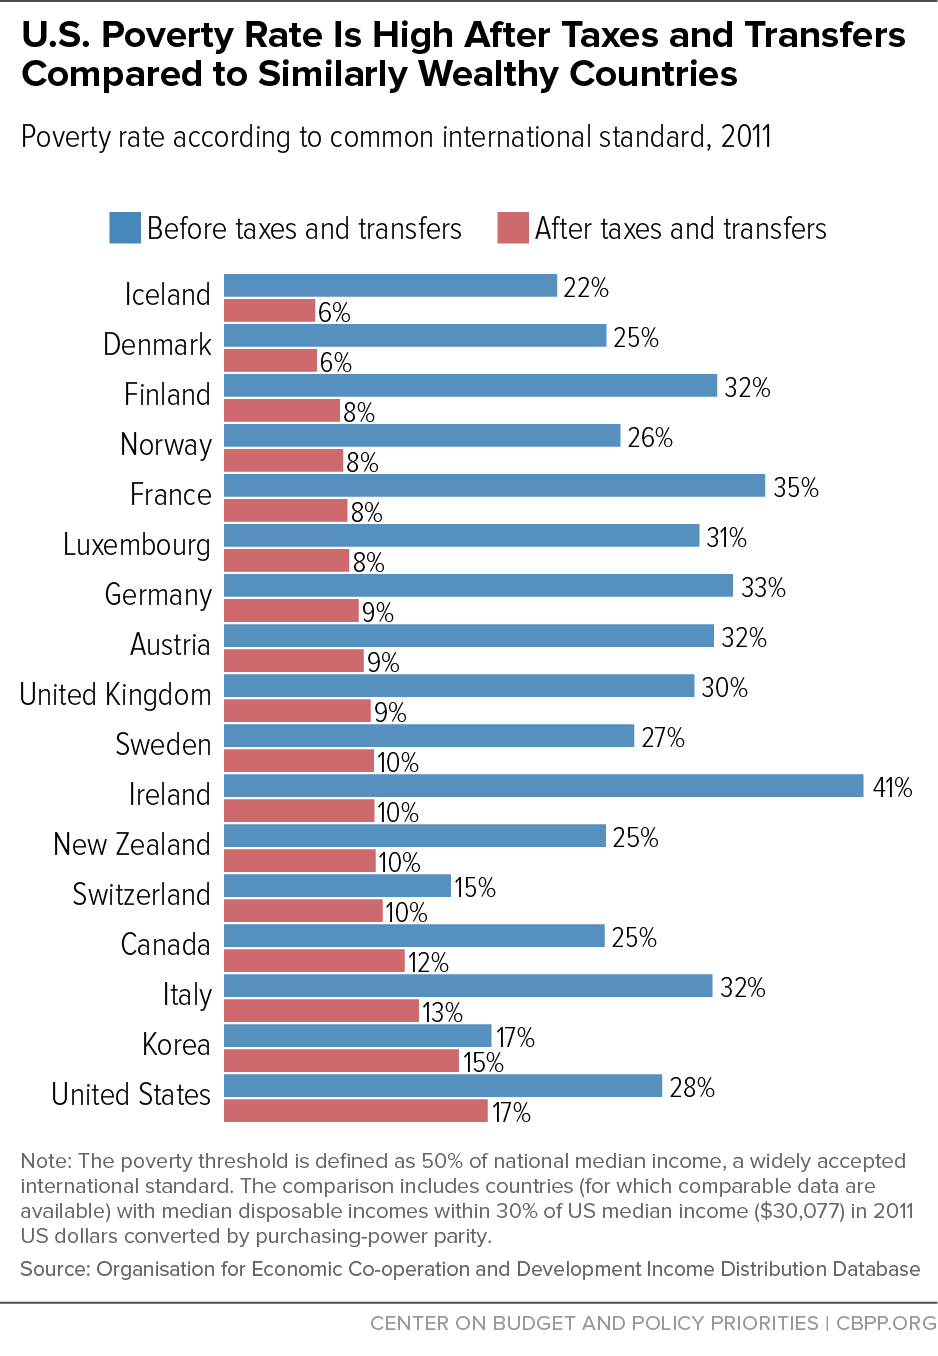 U.S. Poverty Rate is High After Taxes and Transfers Compared to Similarly Wealthy Countries